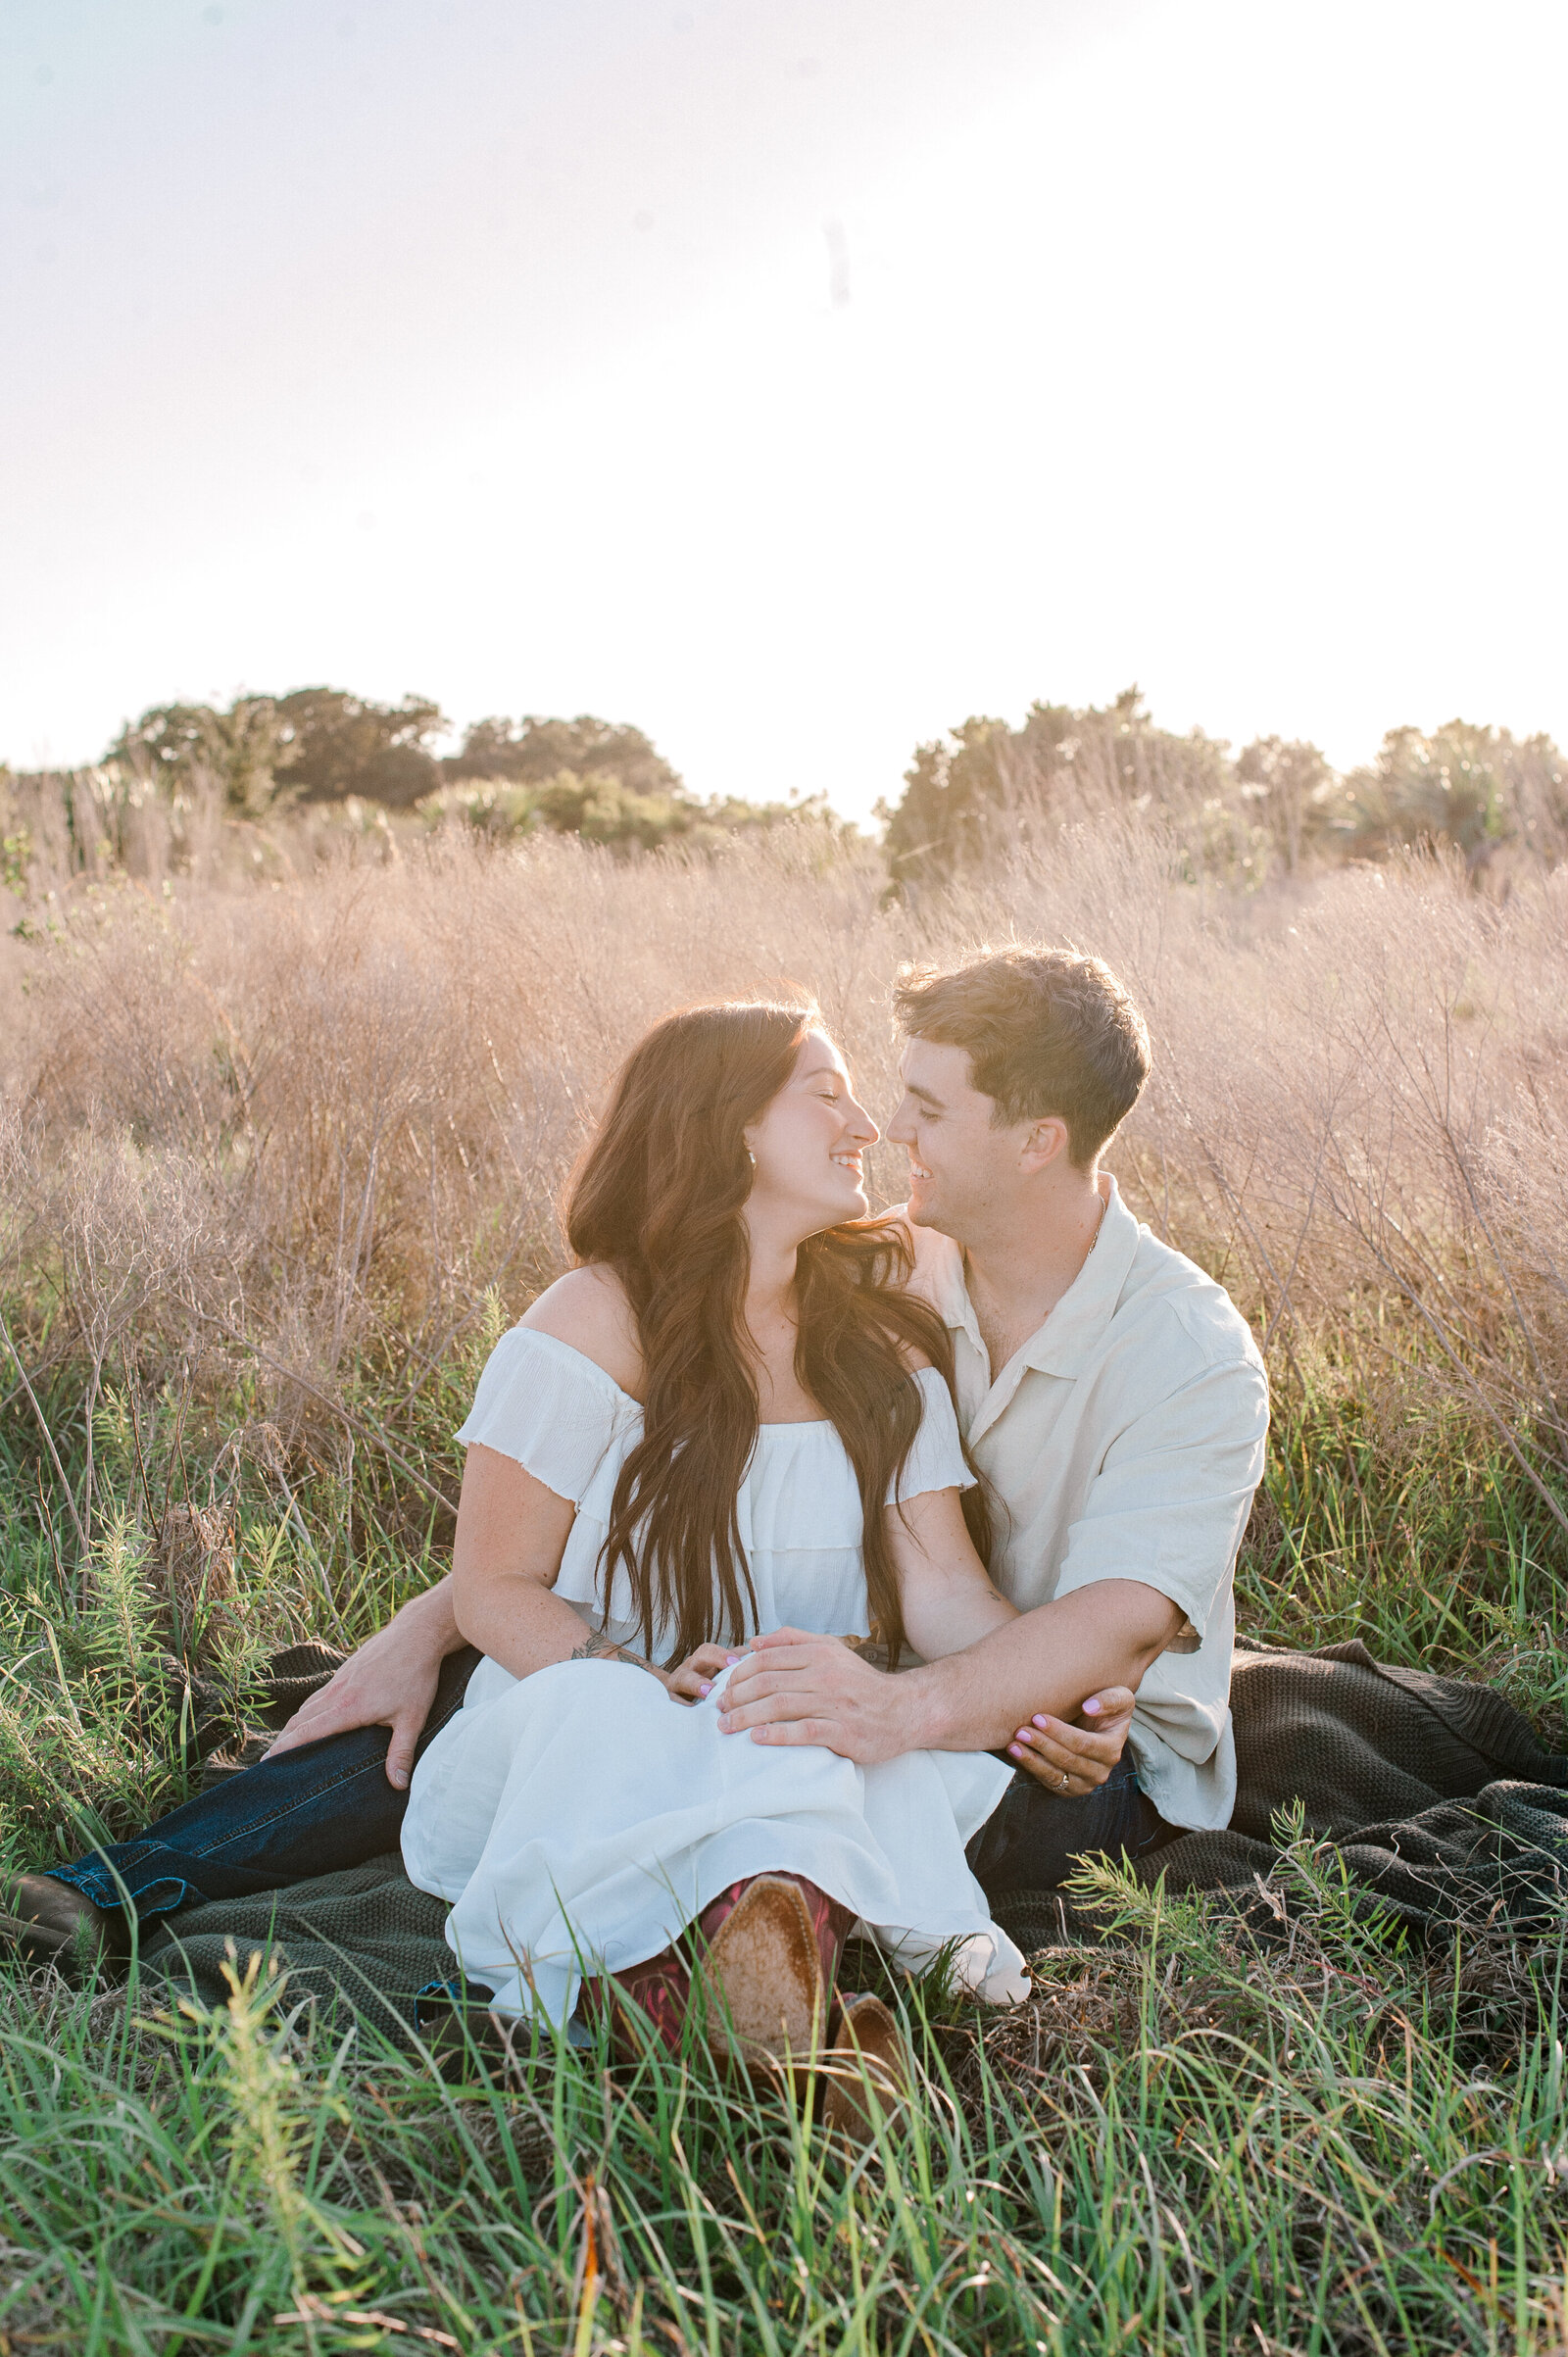 Orlando couples photographer captures a couple sitting in a tall grass field going in for a loving kiss at sunset